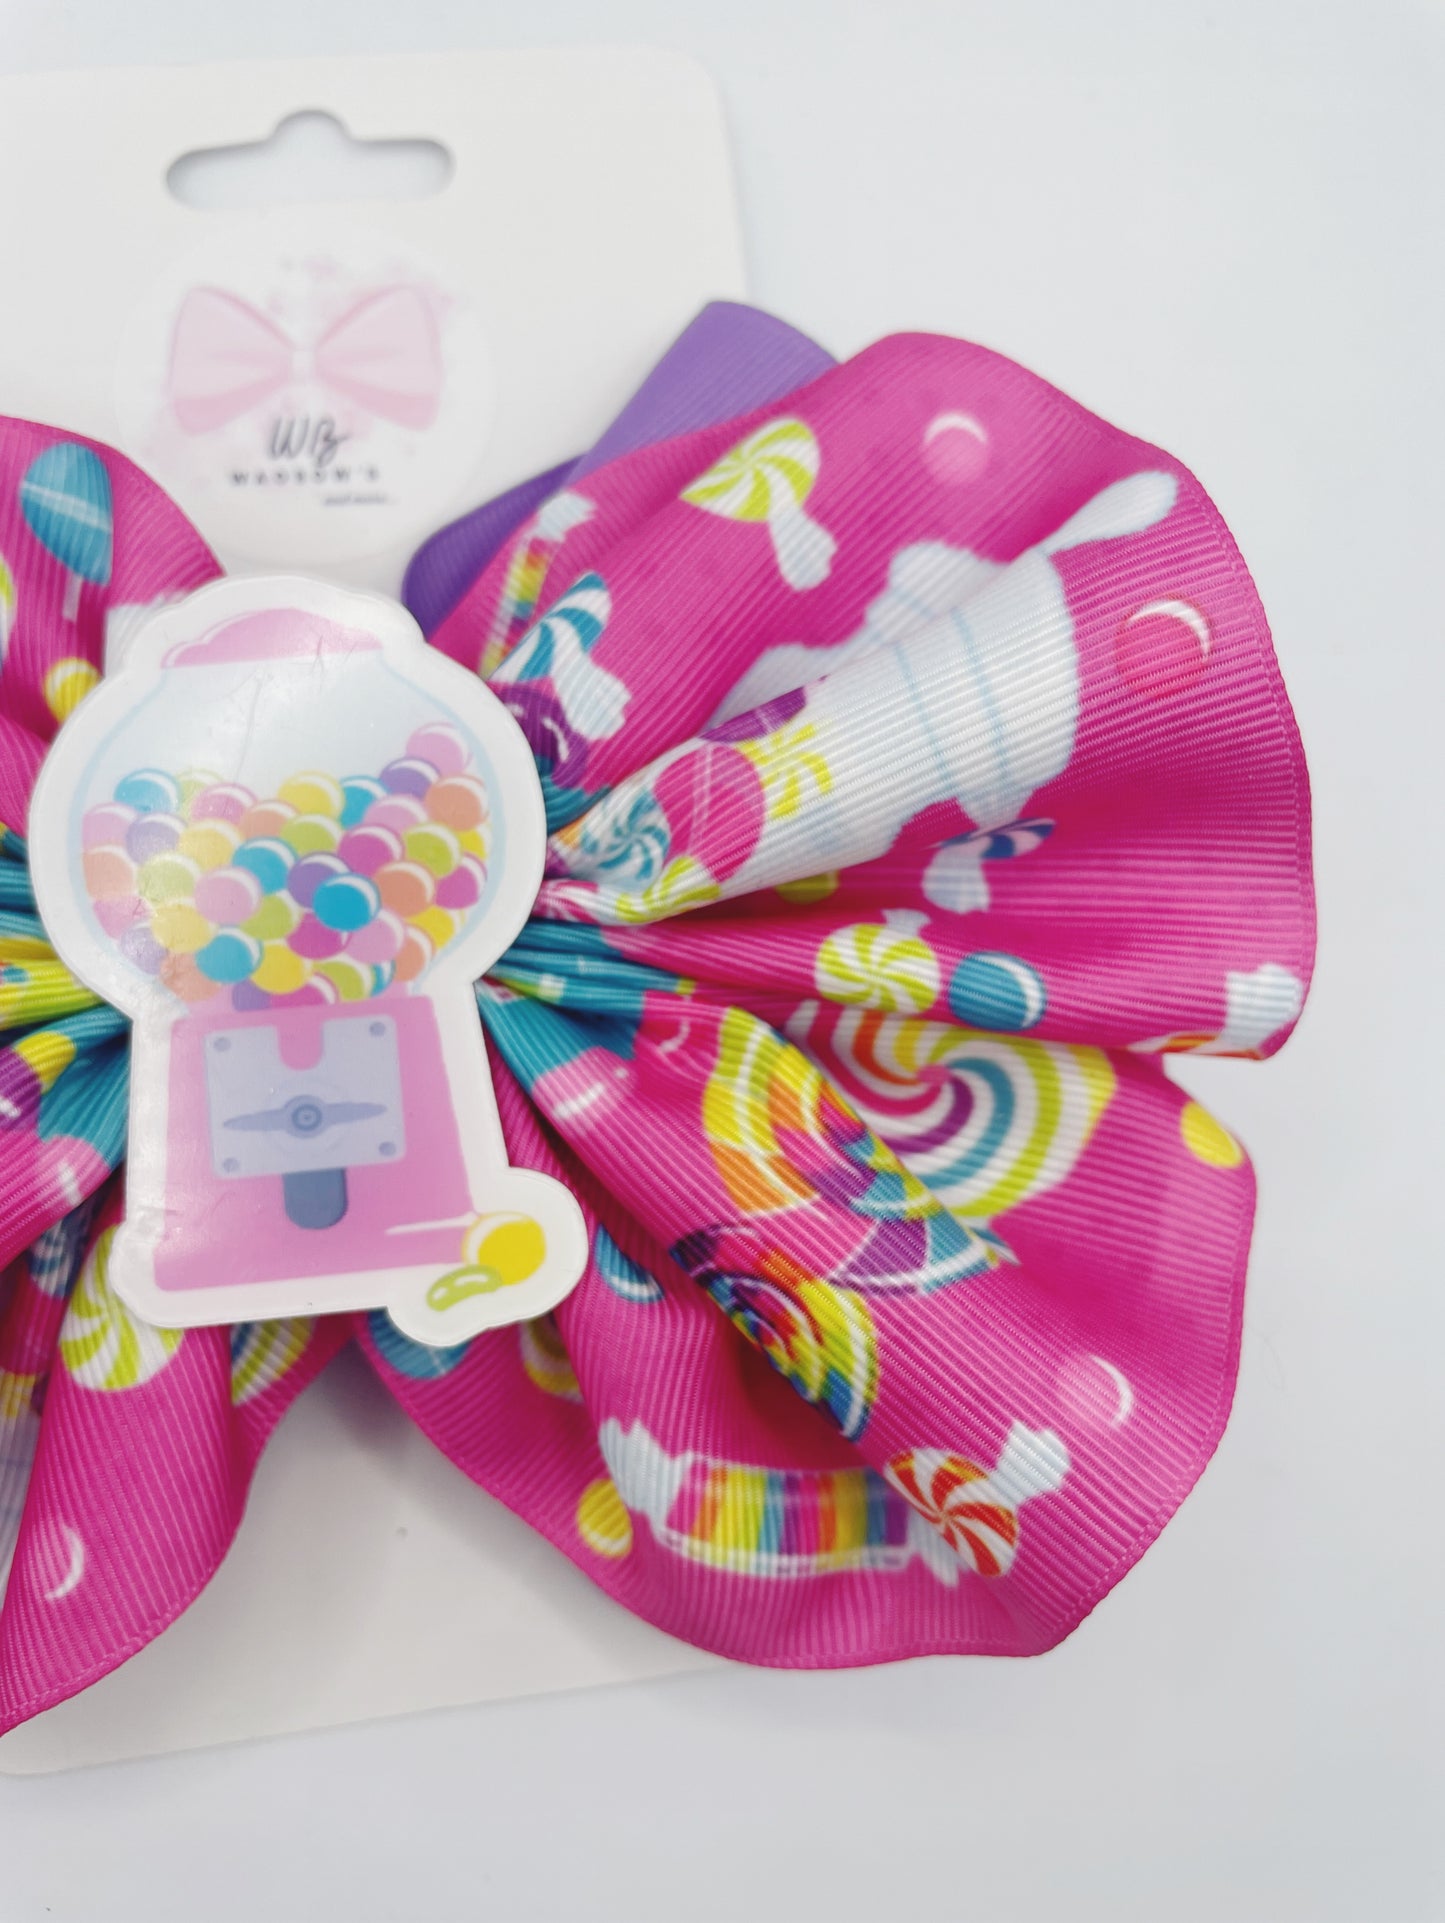 Candy Hair Bow On Alligator Clip  Sweet Temptation Hair Bow 6” Hair Bow Clip  Big Ribbons Hair Bow